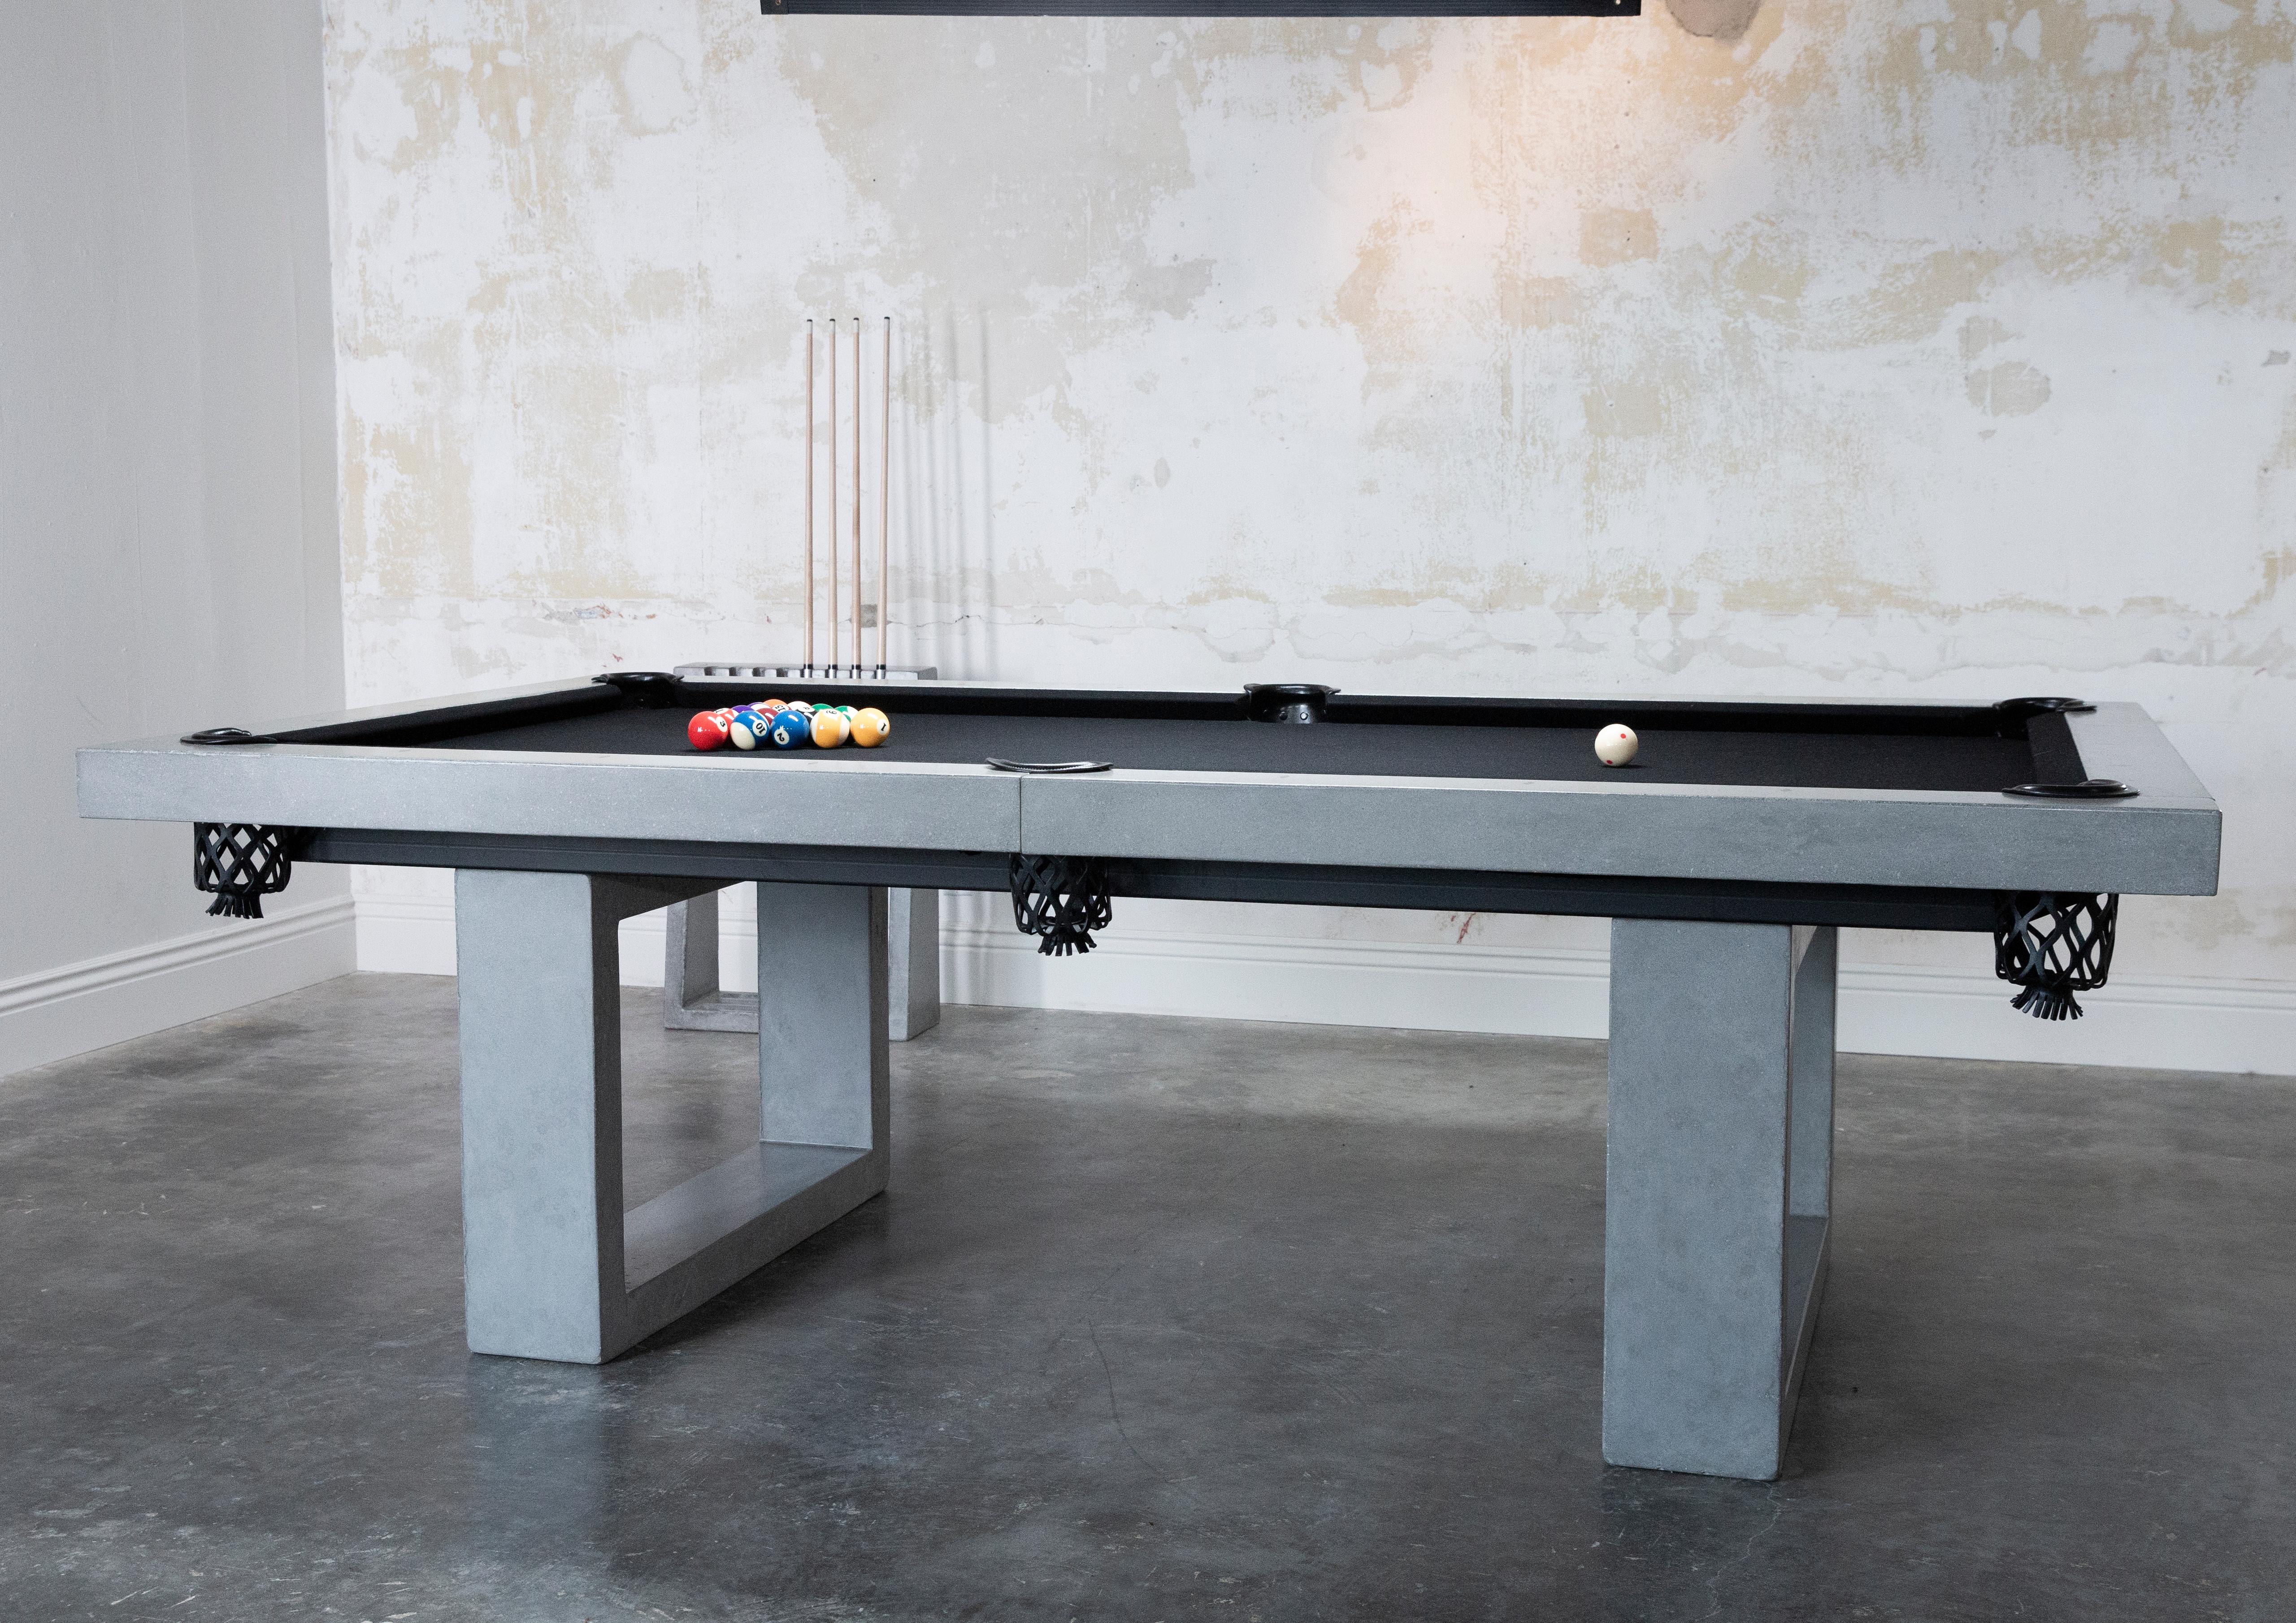 **Table available now is in Light Grey**

The classic James de Wulf Concrete Billiards Table is a staple to any game room. The regulation sized table is constructed of concrete reinforced with carbon fiber. It features a smooth, high-performance